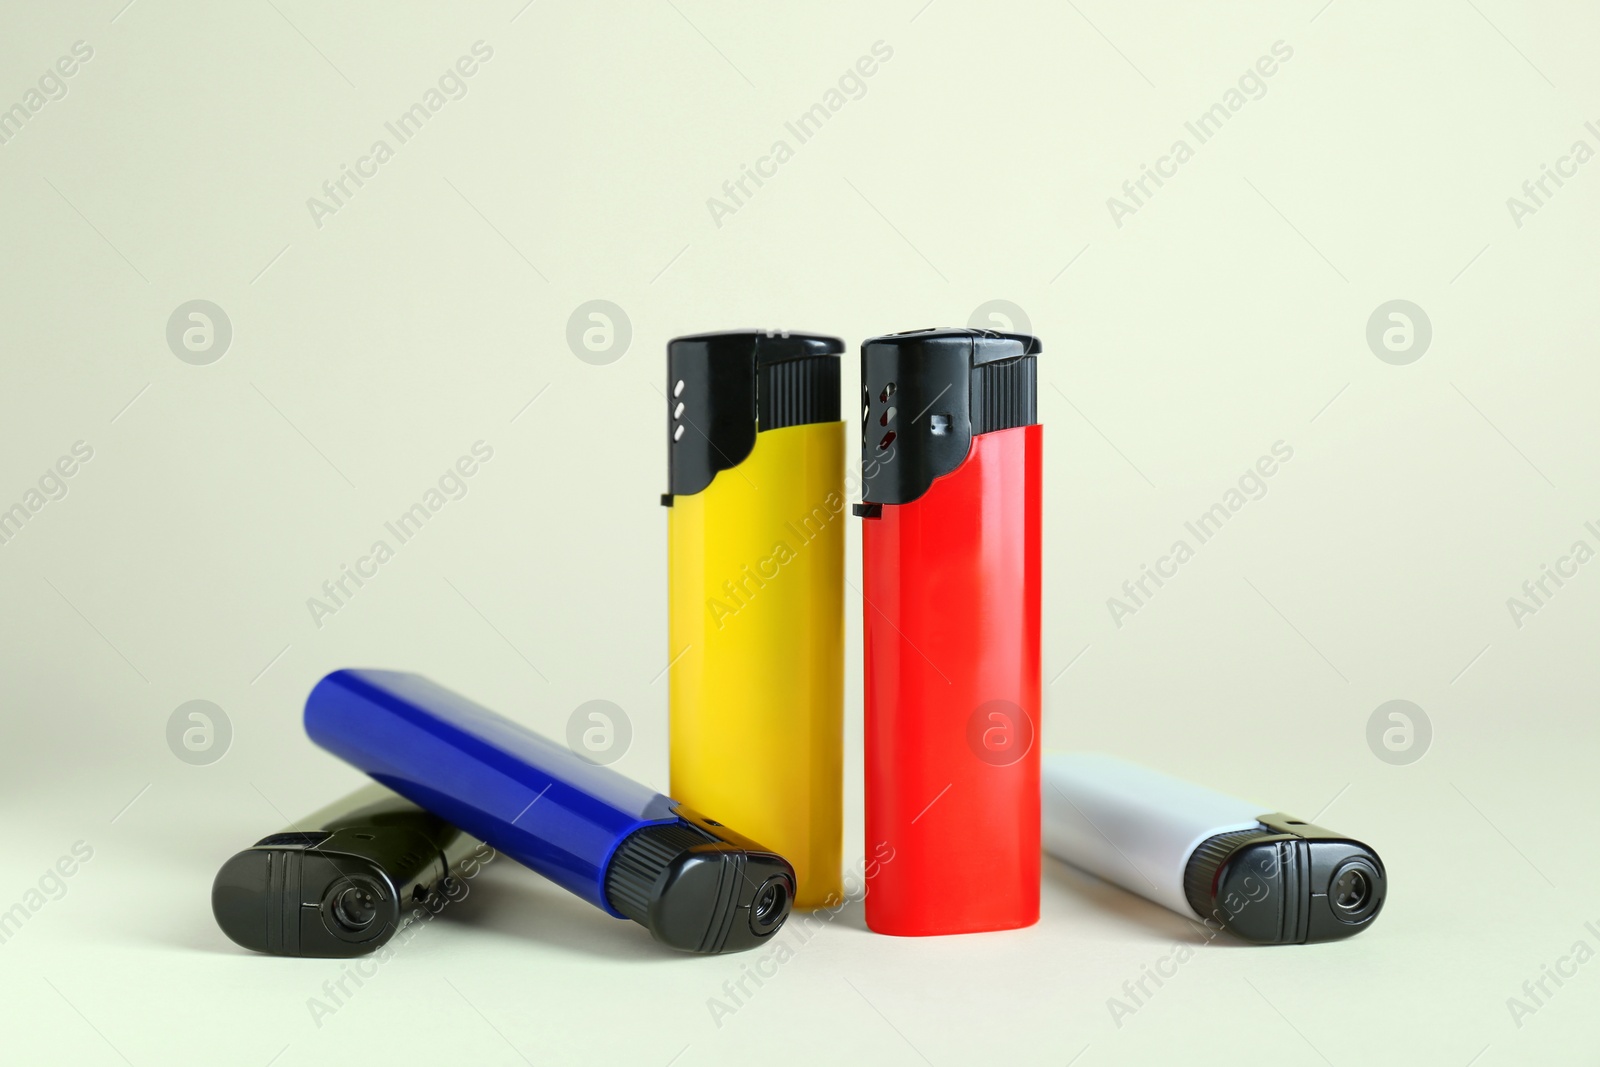 Photo of Stylish small pocket lighters on beige background